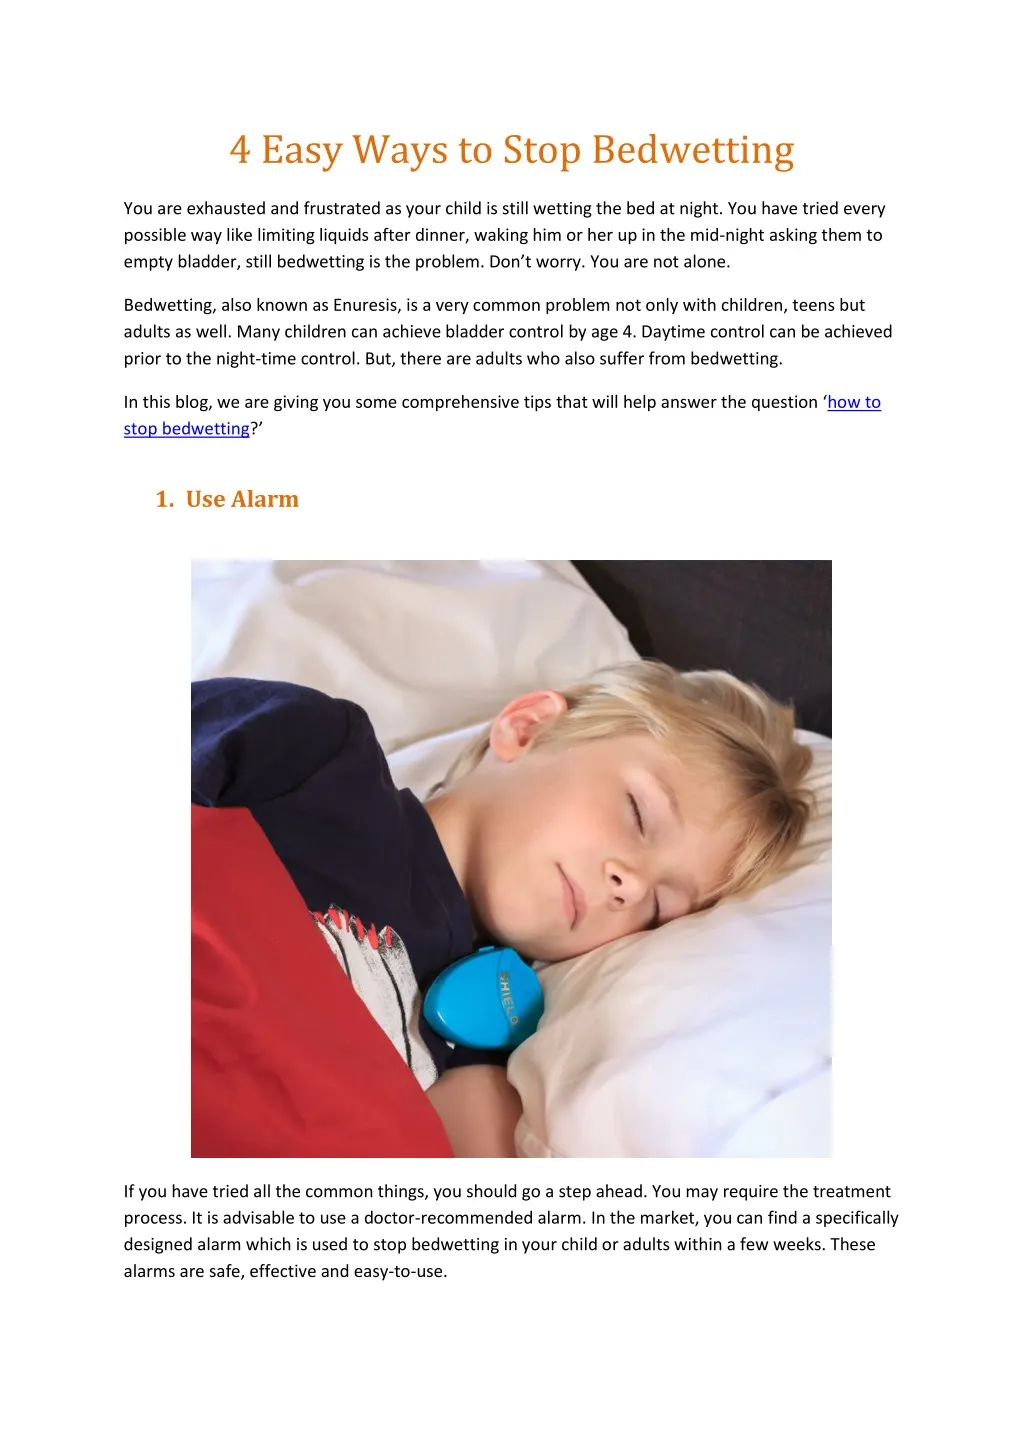 4 easy ways to stop bedwetting